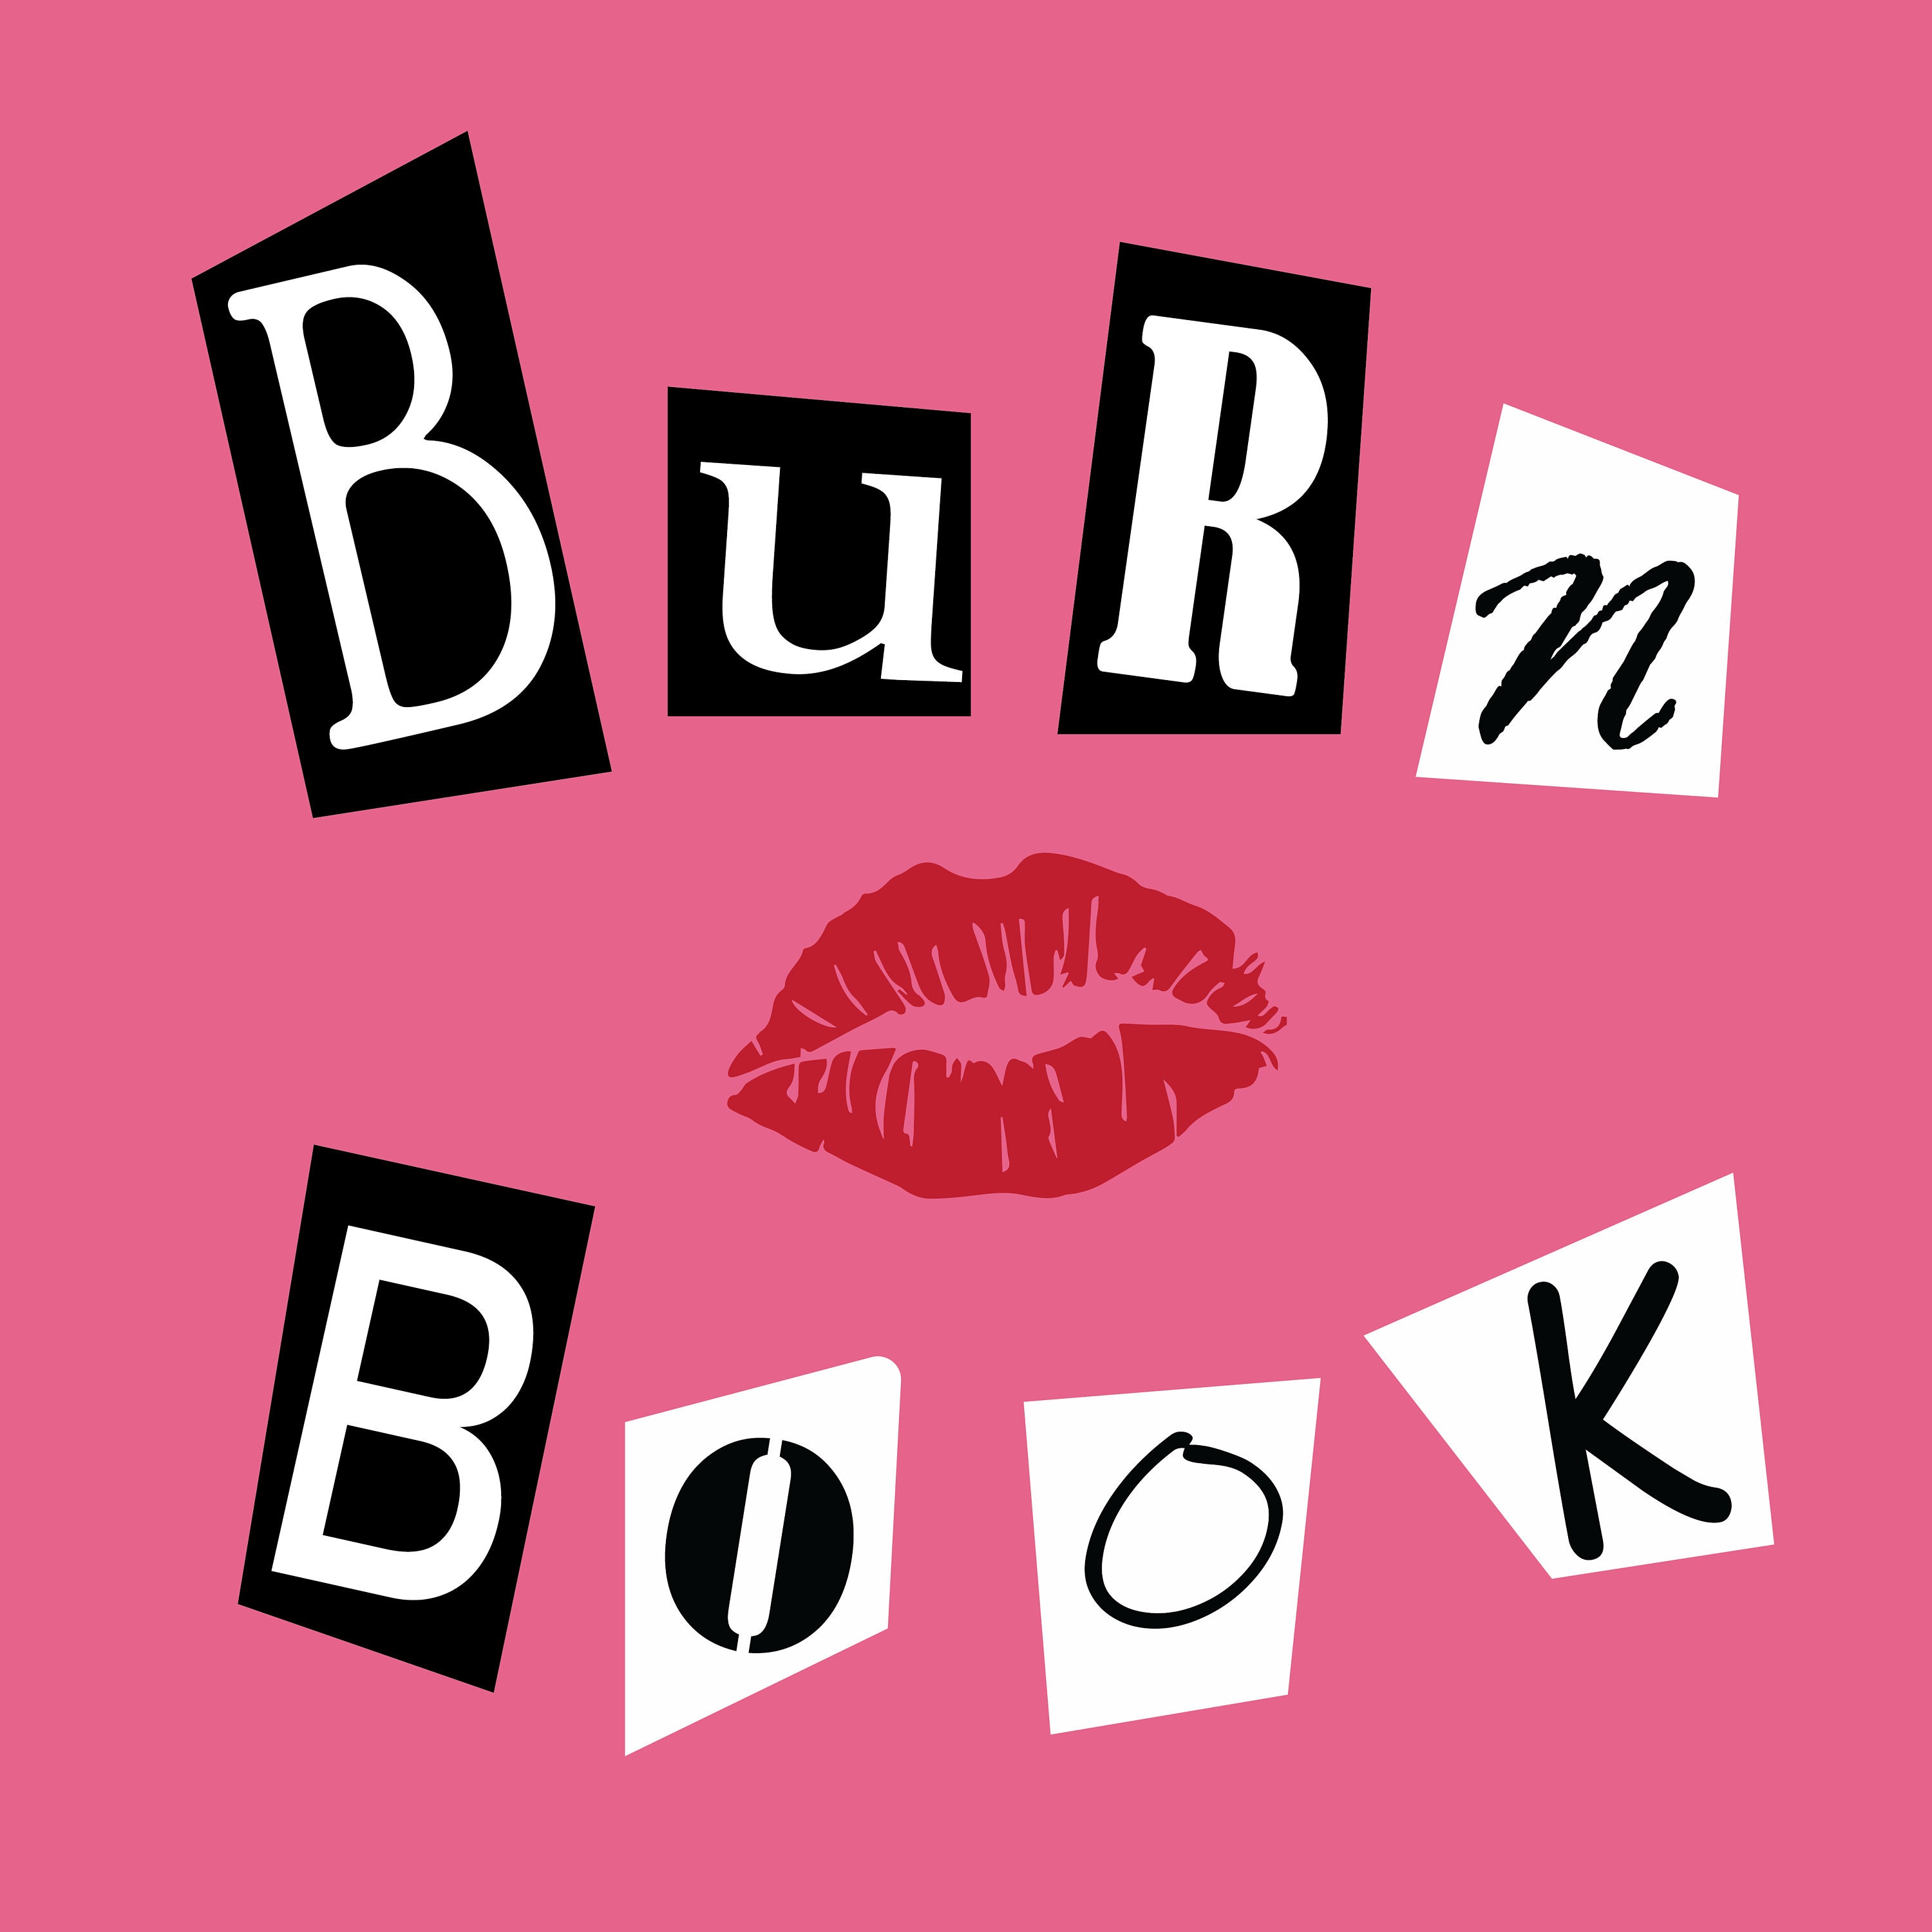 burn book cover letters